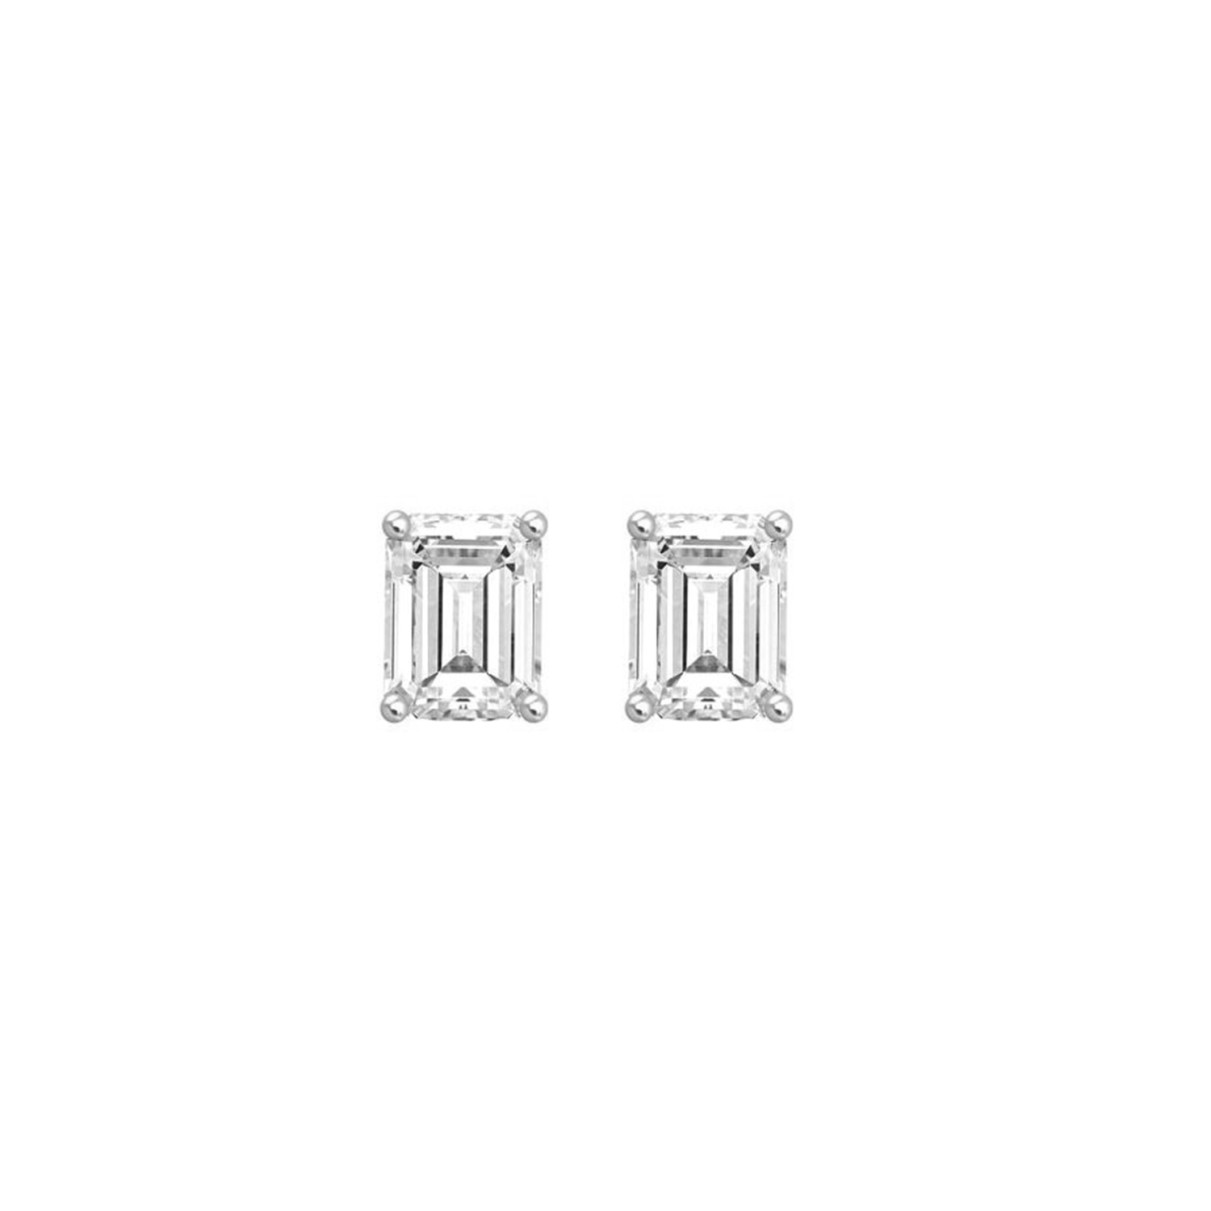 LADIES SOLITAIRE EARRINGS 2 1/2CT EMERALD DIAMOND 14K WHITE GOLD 